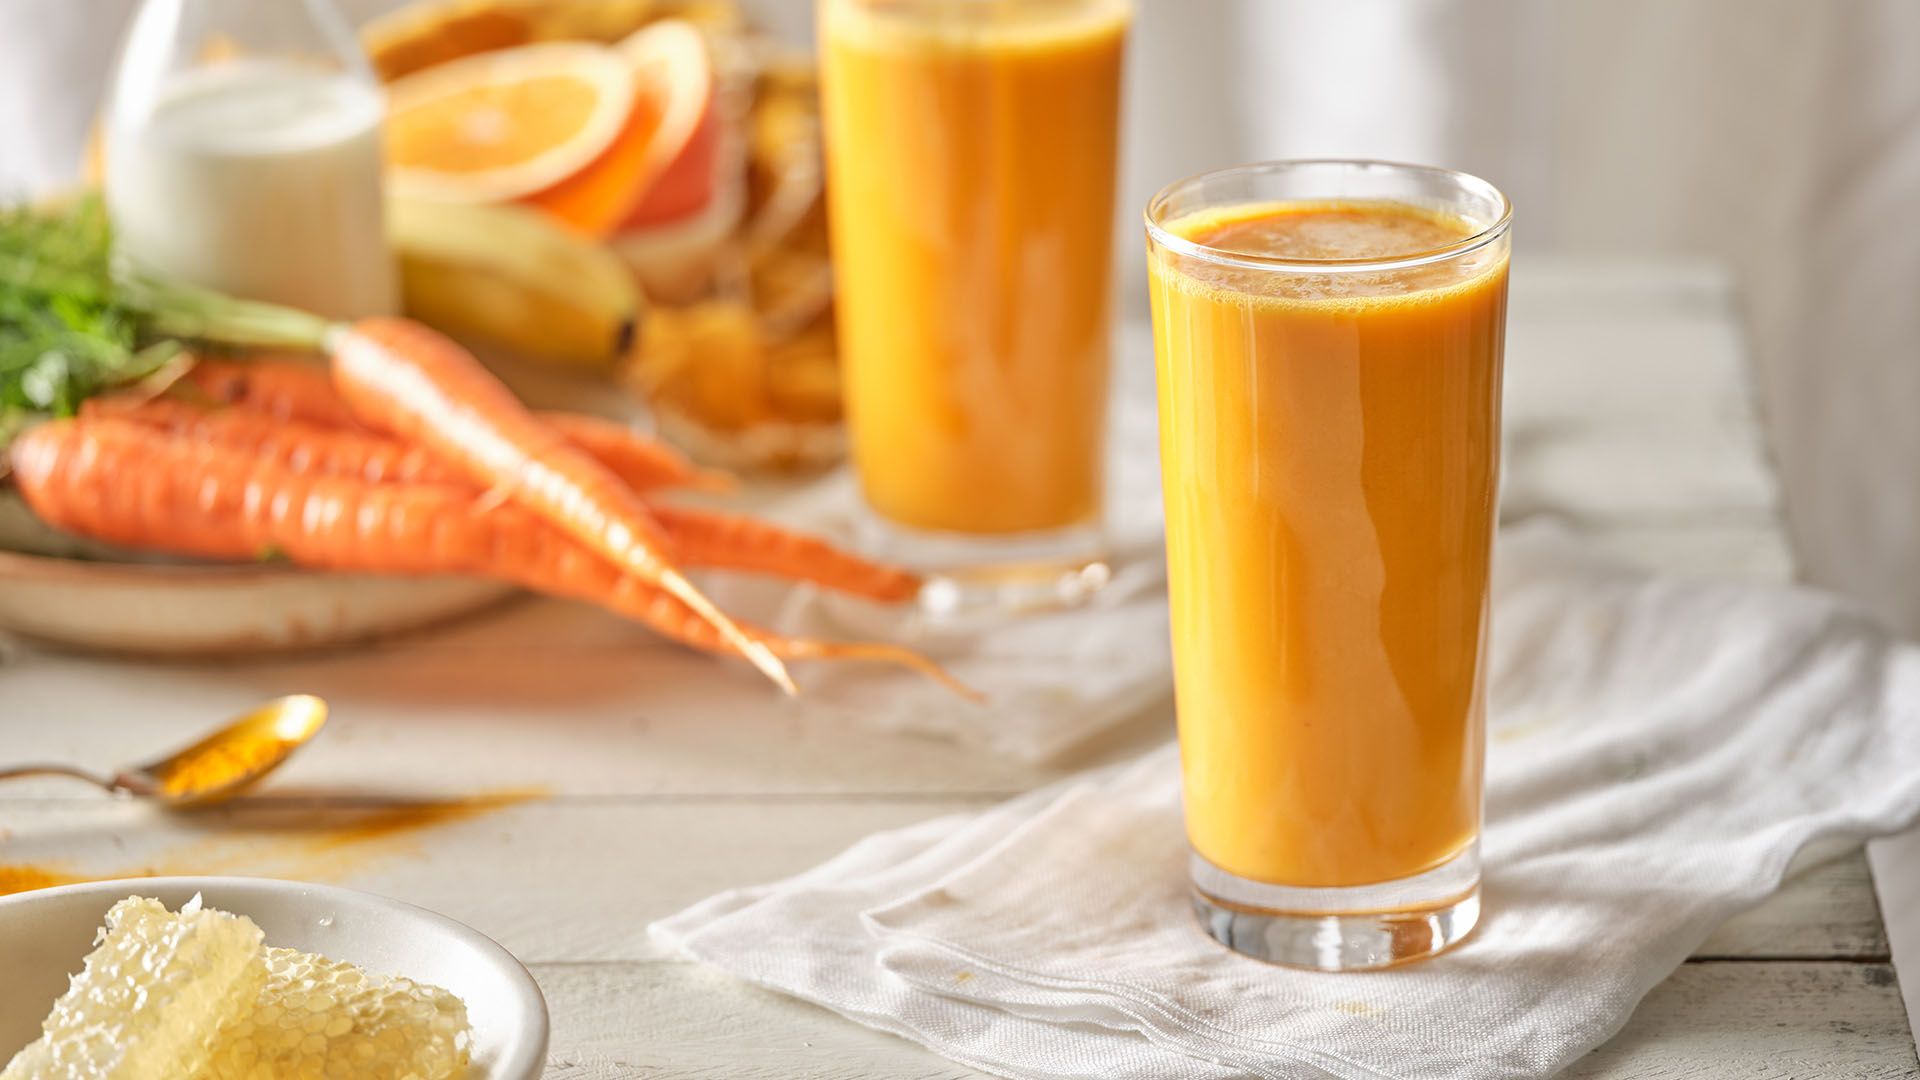 Two glasses with orange Kefir smoothie with pitcher of milk and carrots in the background.